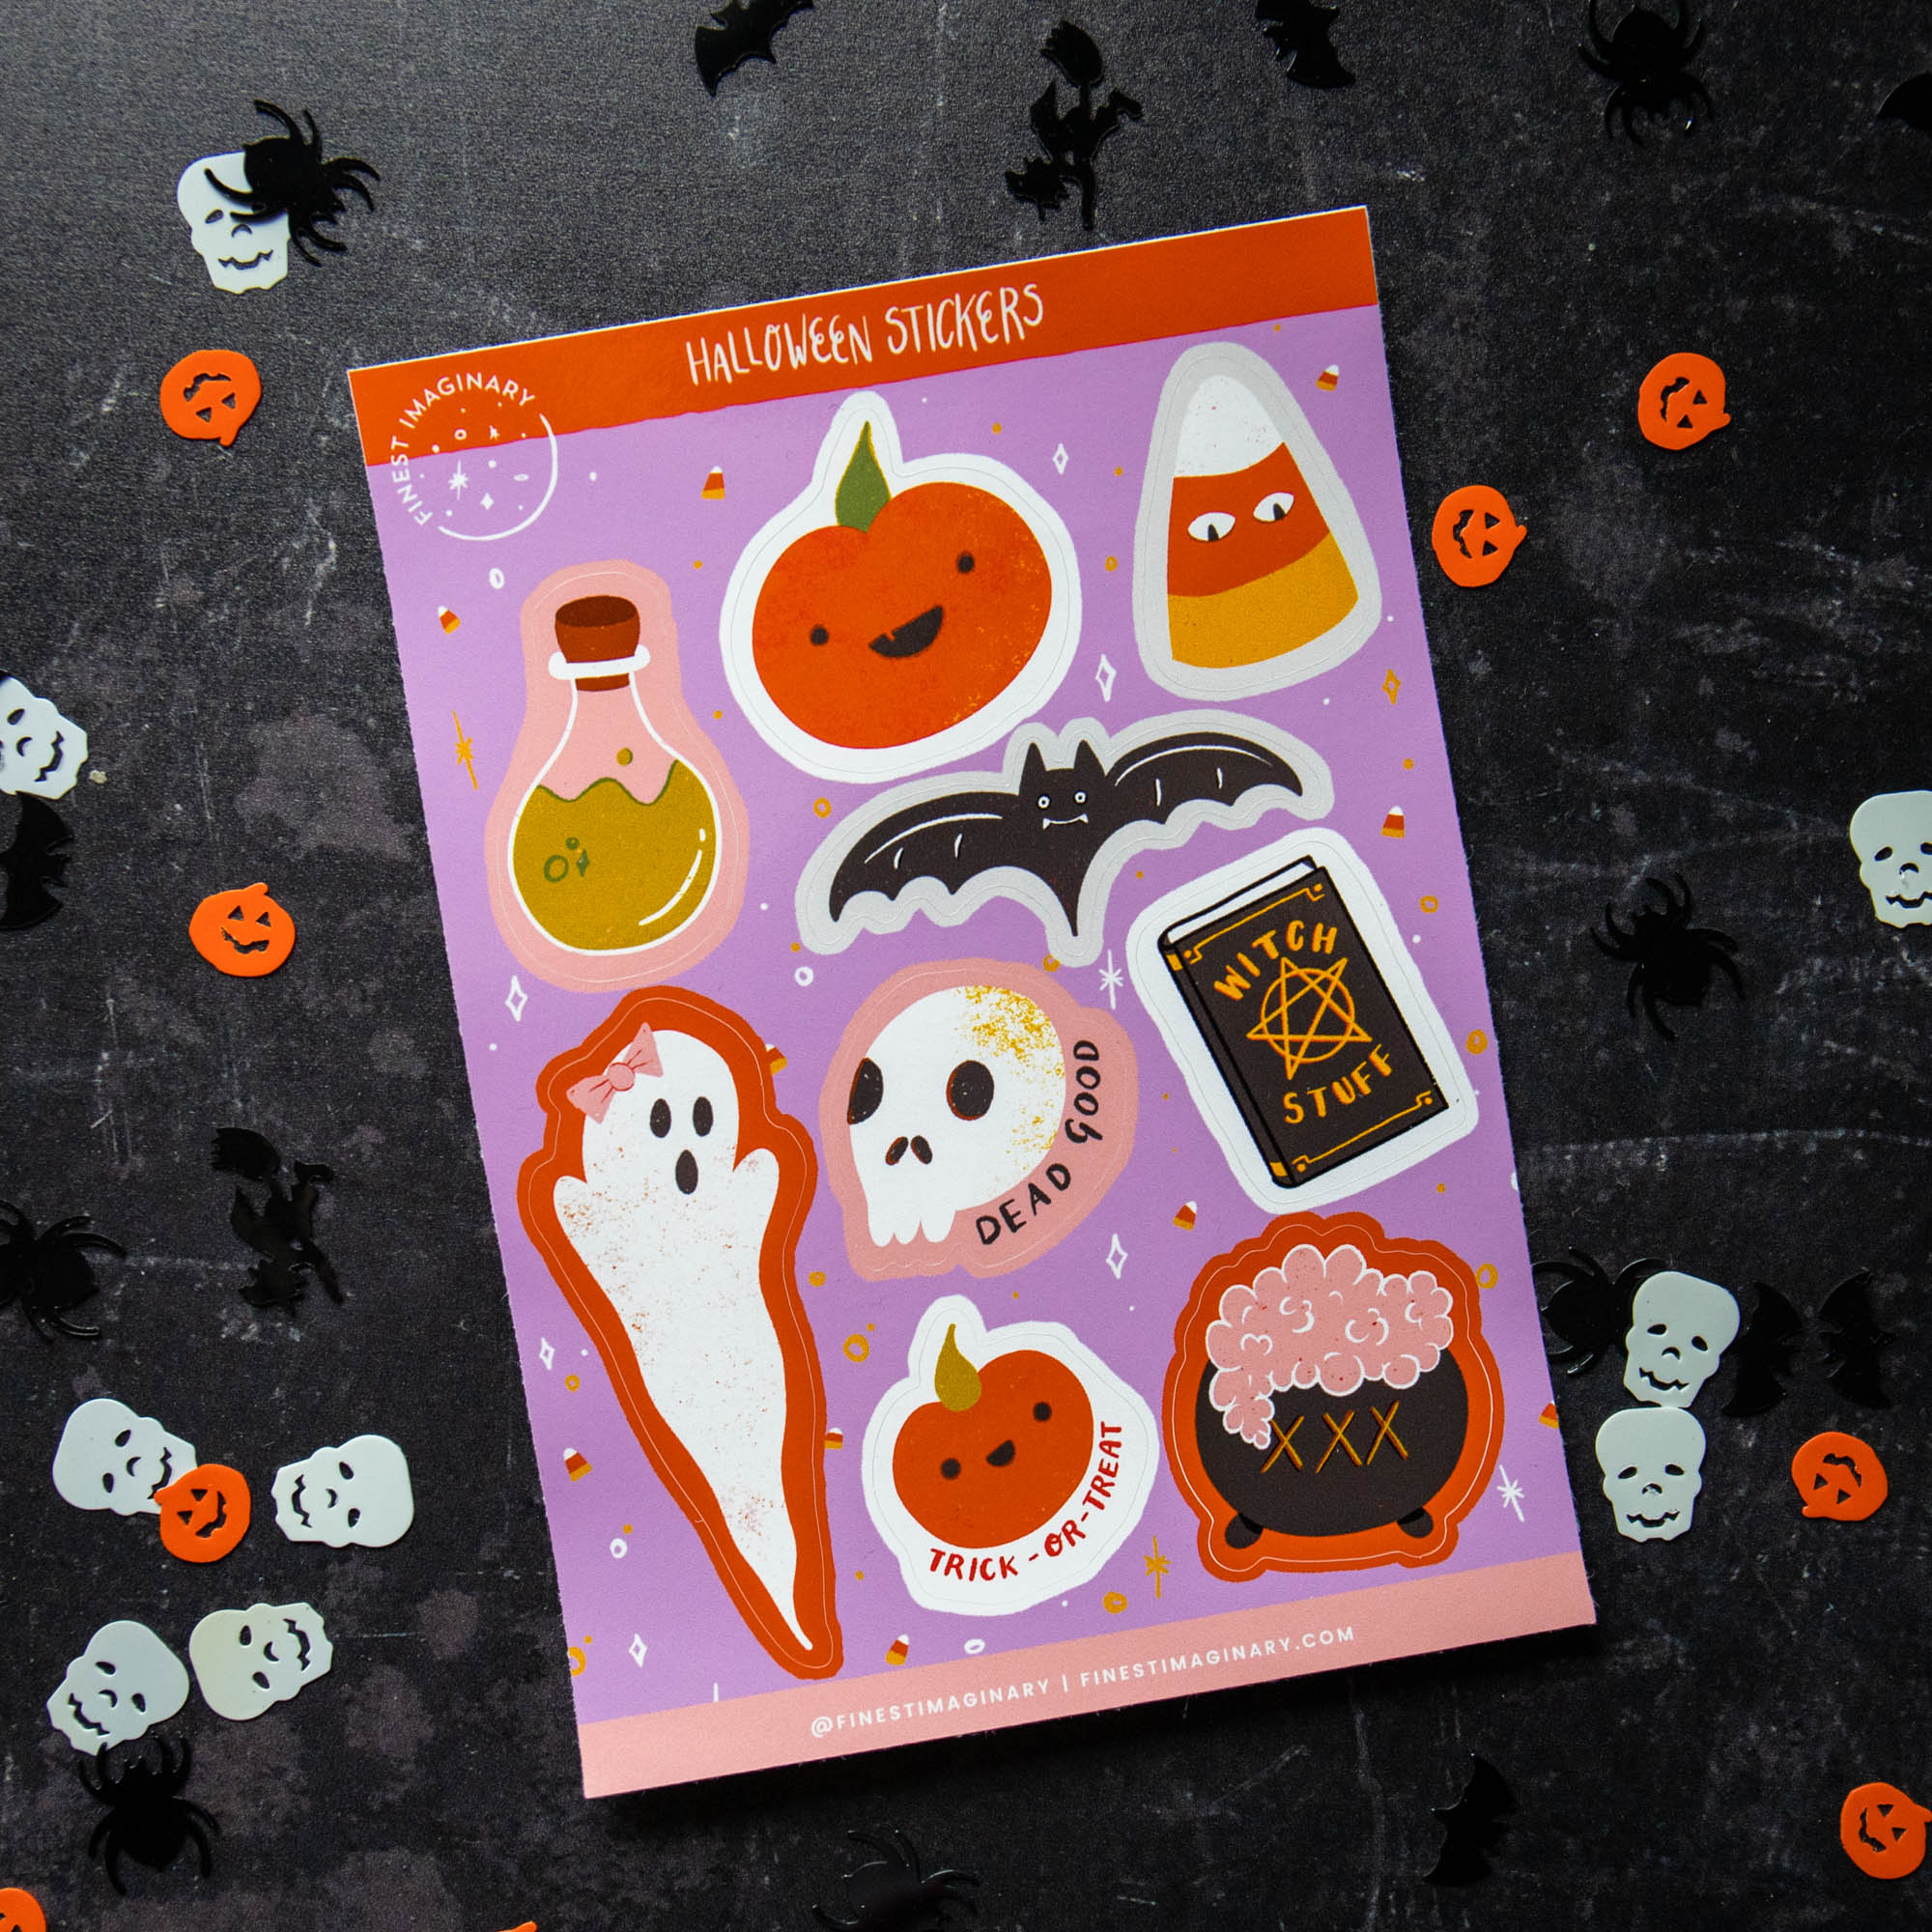 Halloween Stickers and Washi Tape!